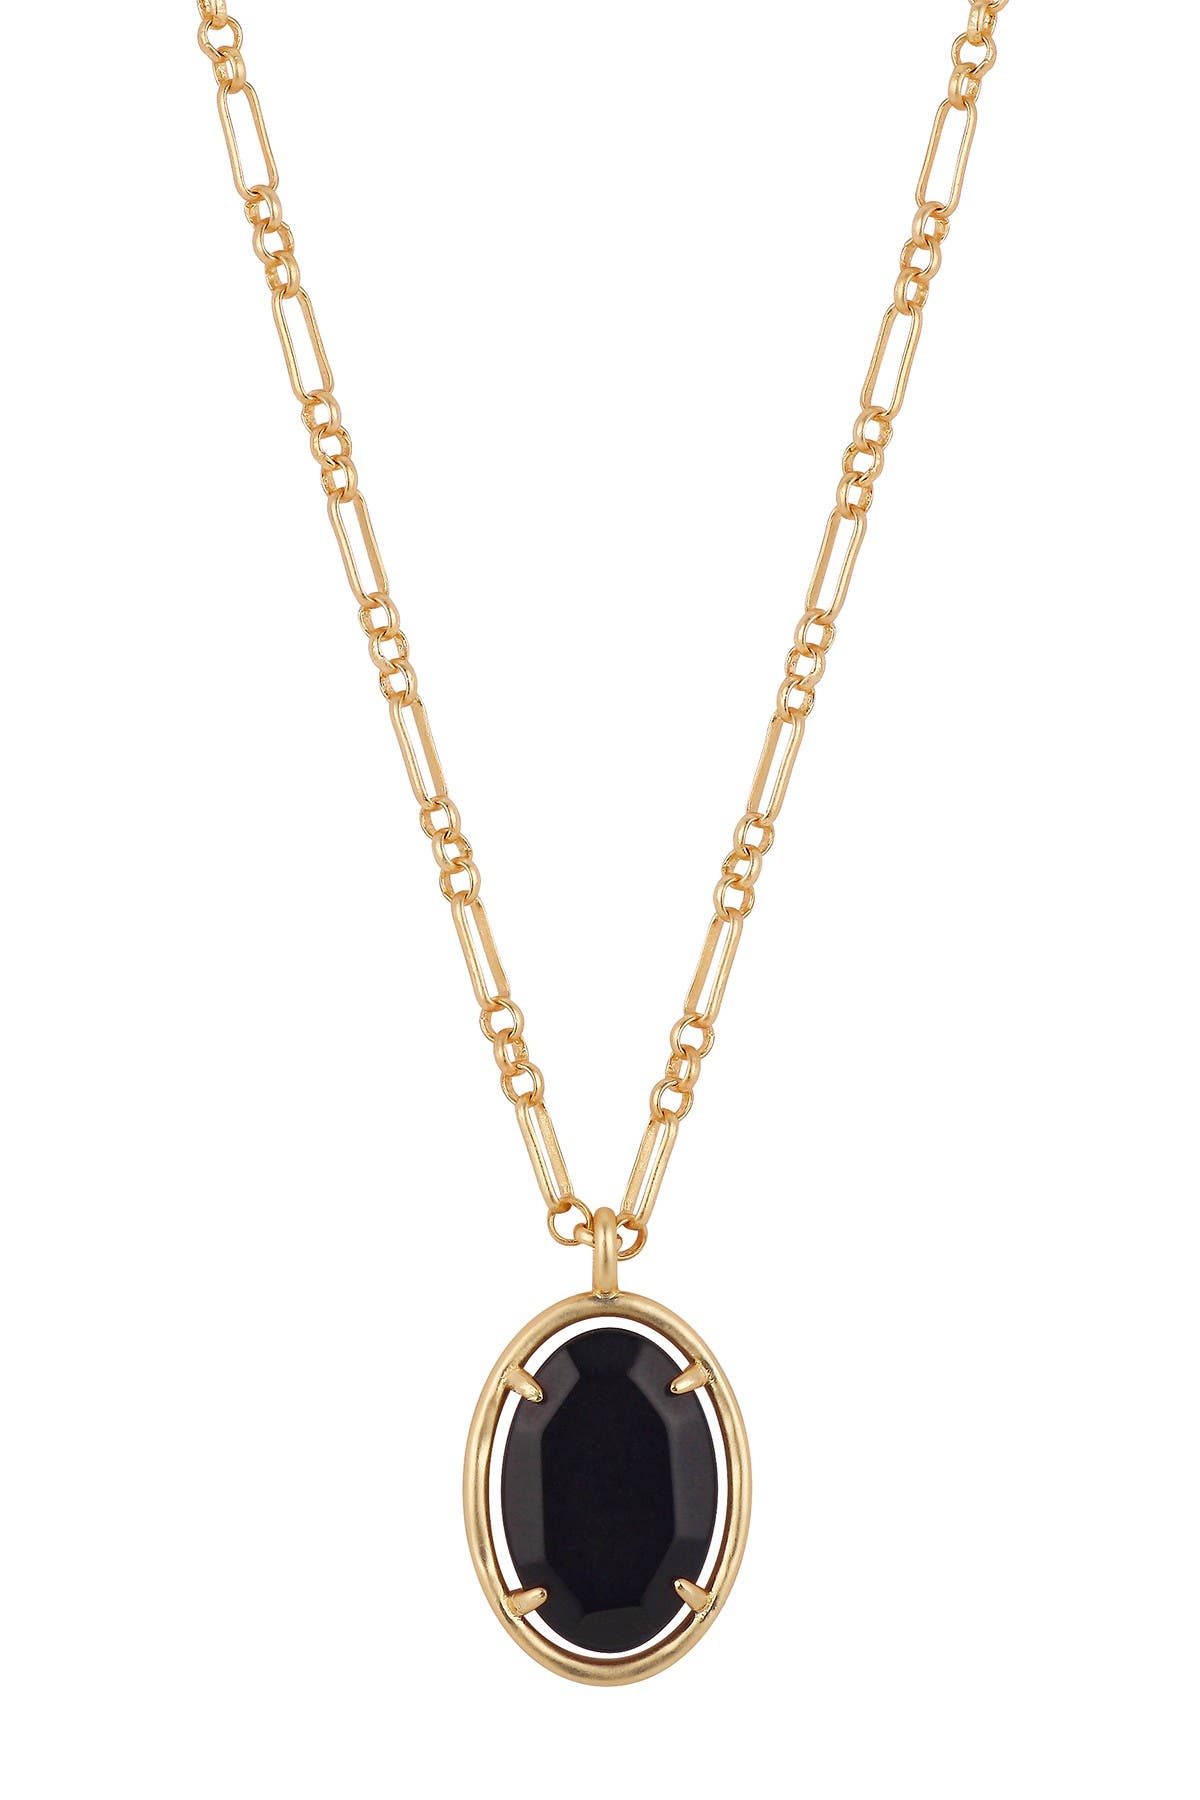 Gold Plated Pendant Twisted Wire Necklace Black Agate Pendant Pendant With Stone Adjustable Size # 1335208 Gold Plated Necklace